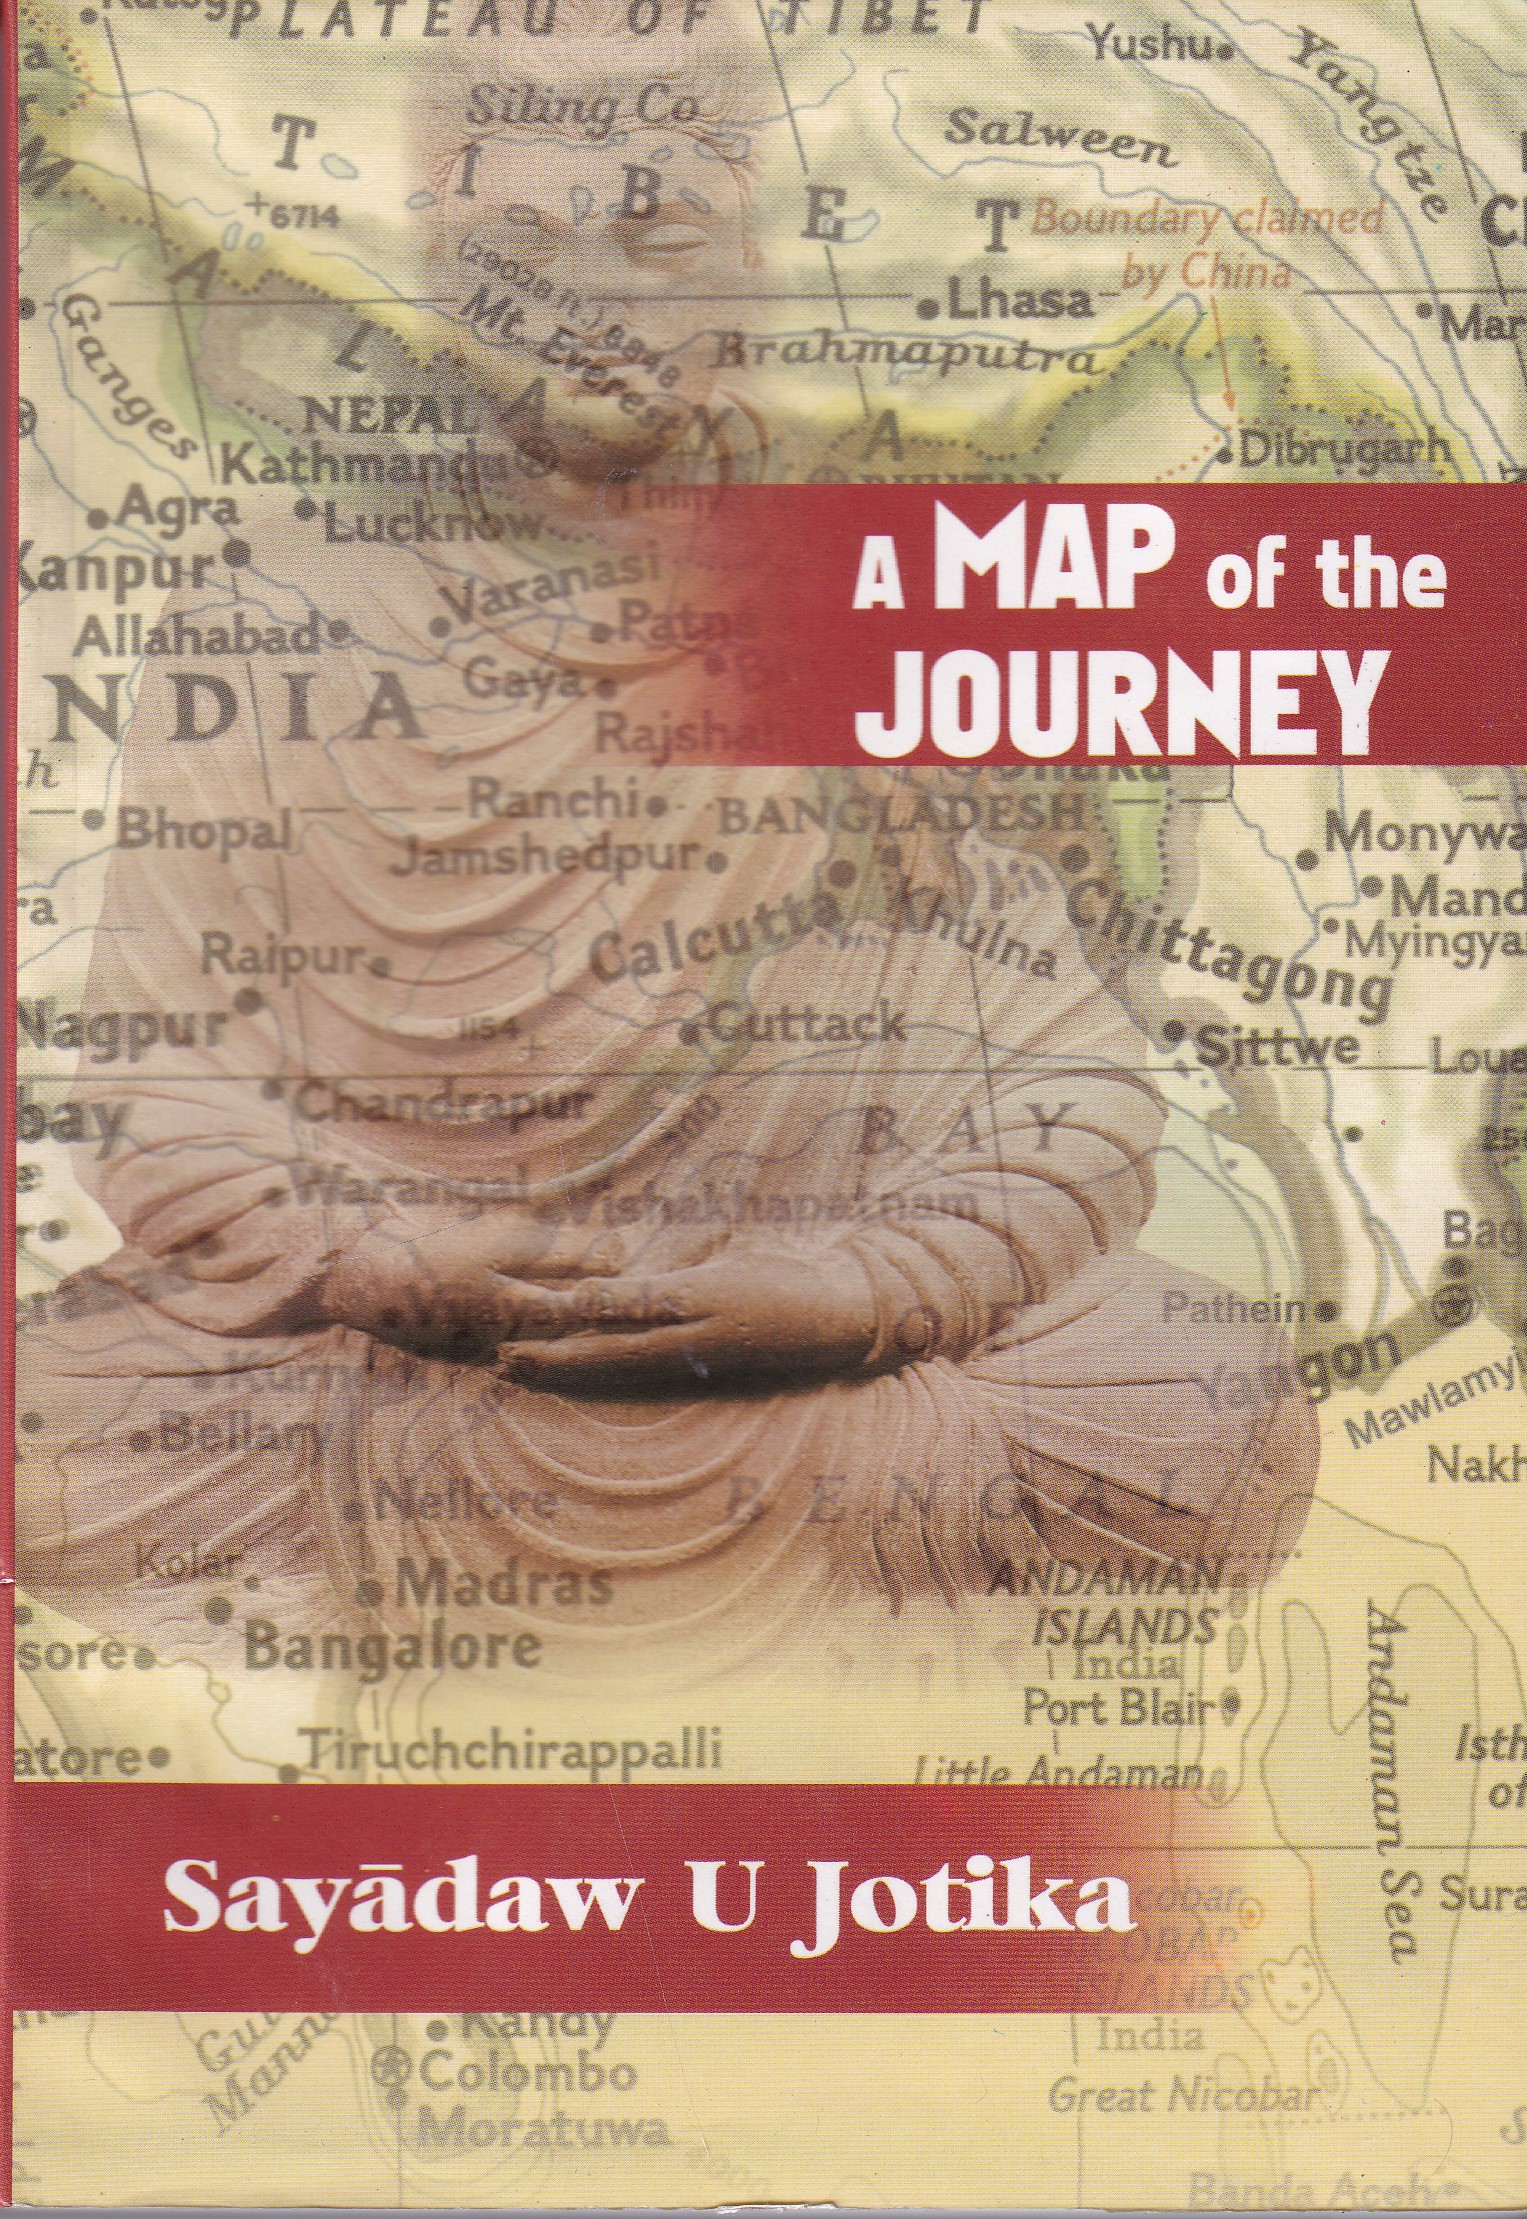 A map of the journey